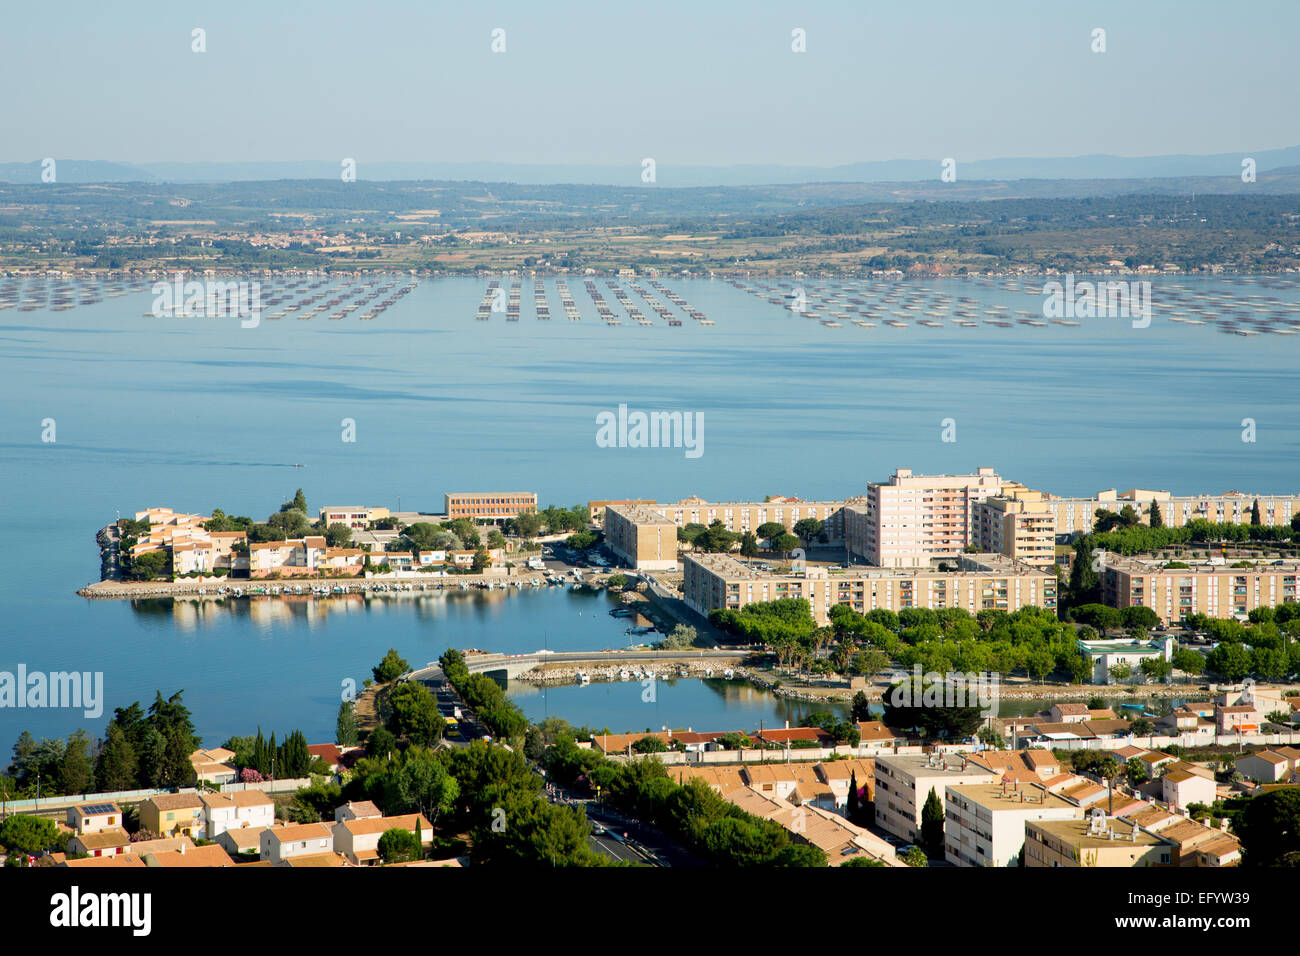 Sète (Hérault department in the Languedoc-Roussillon region in southern France): view over the Etang de Thau Stock Photo